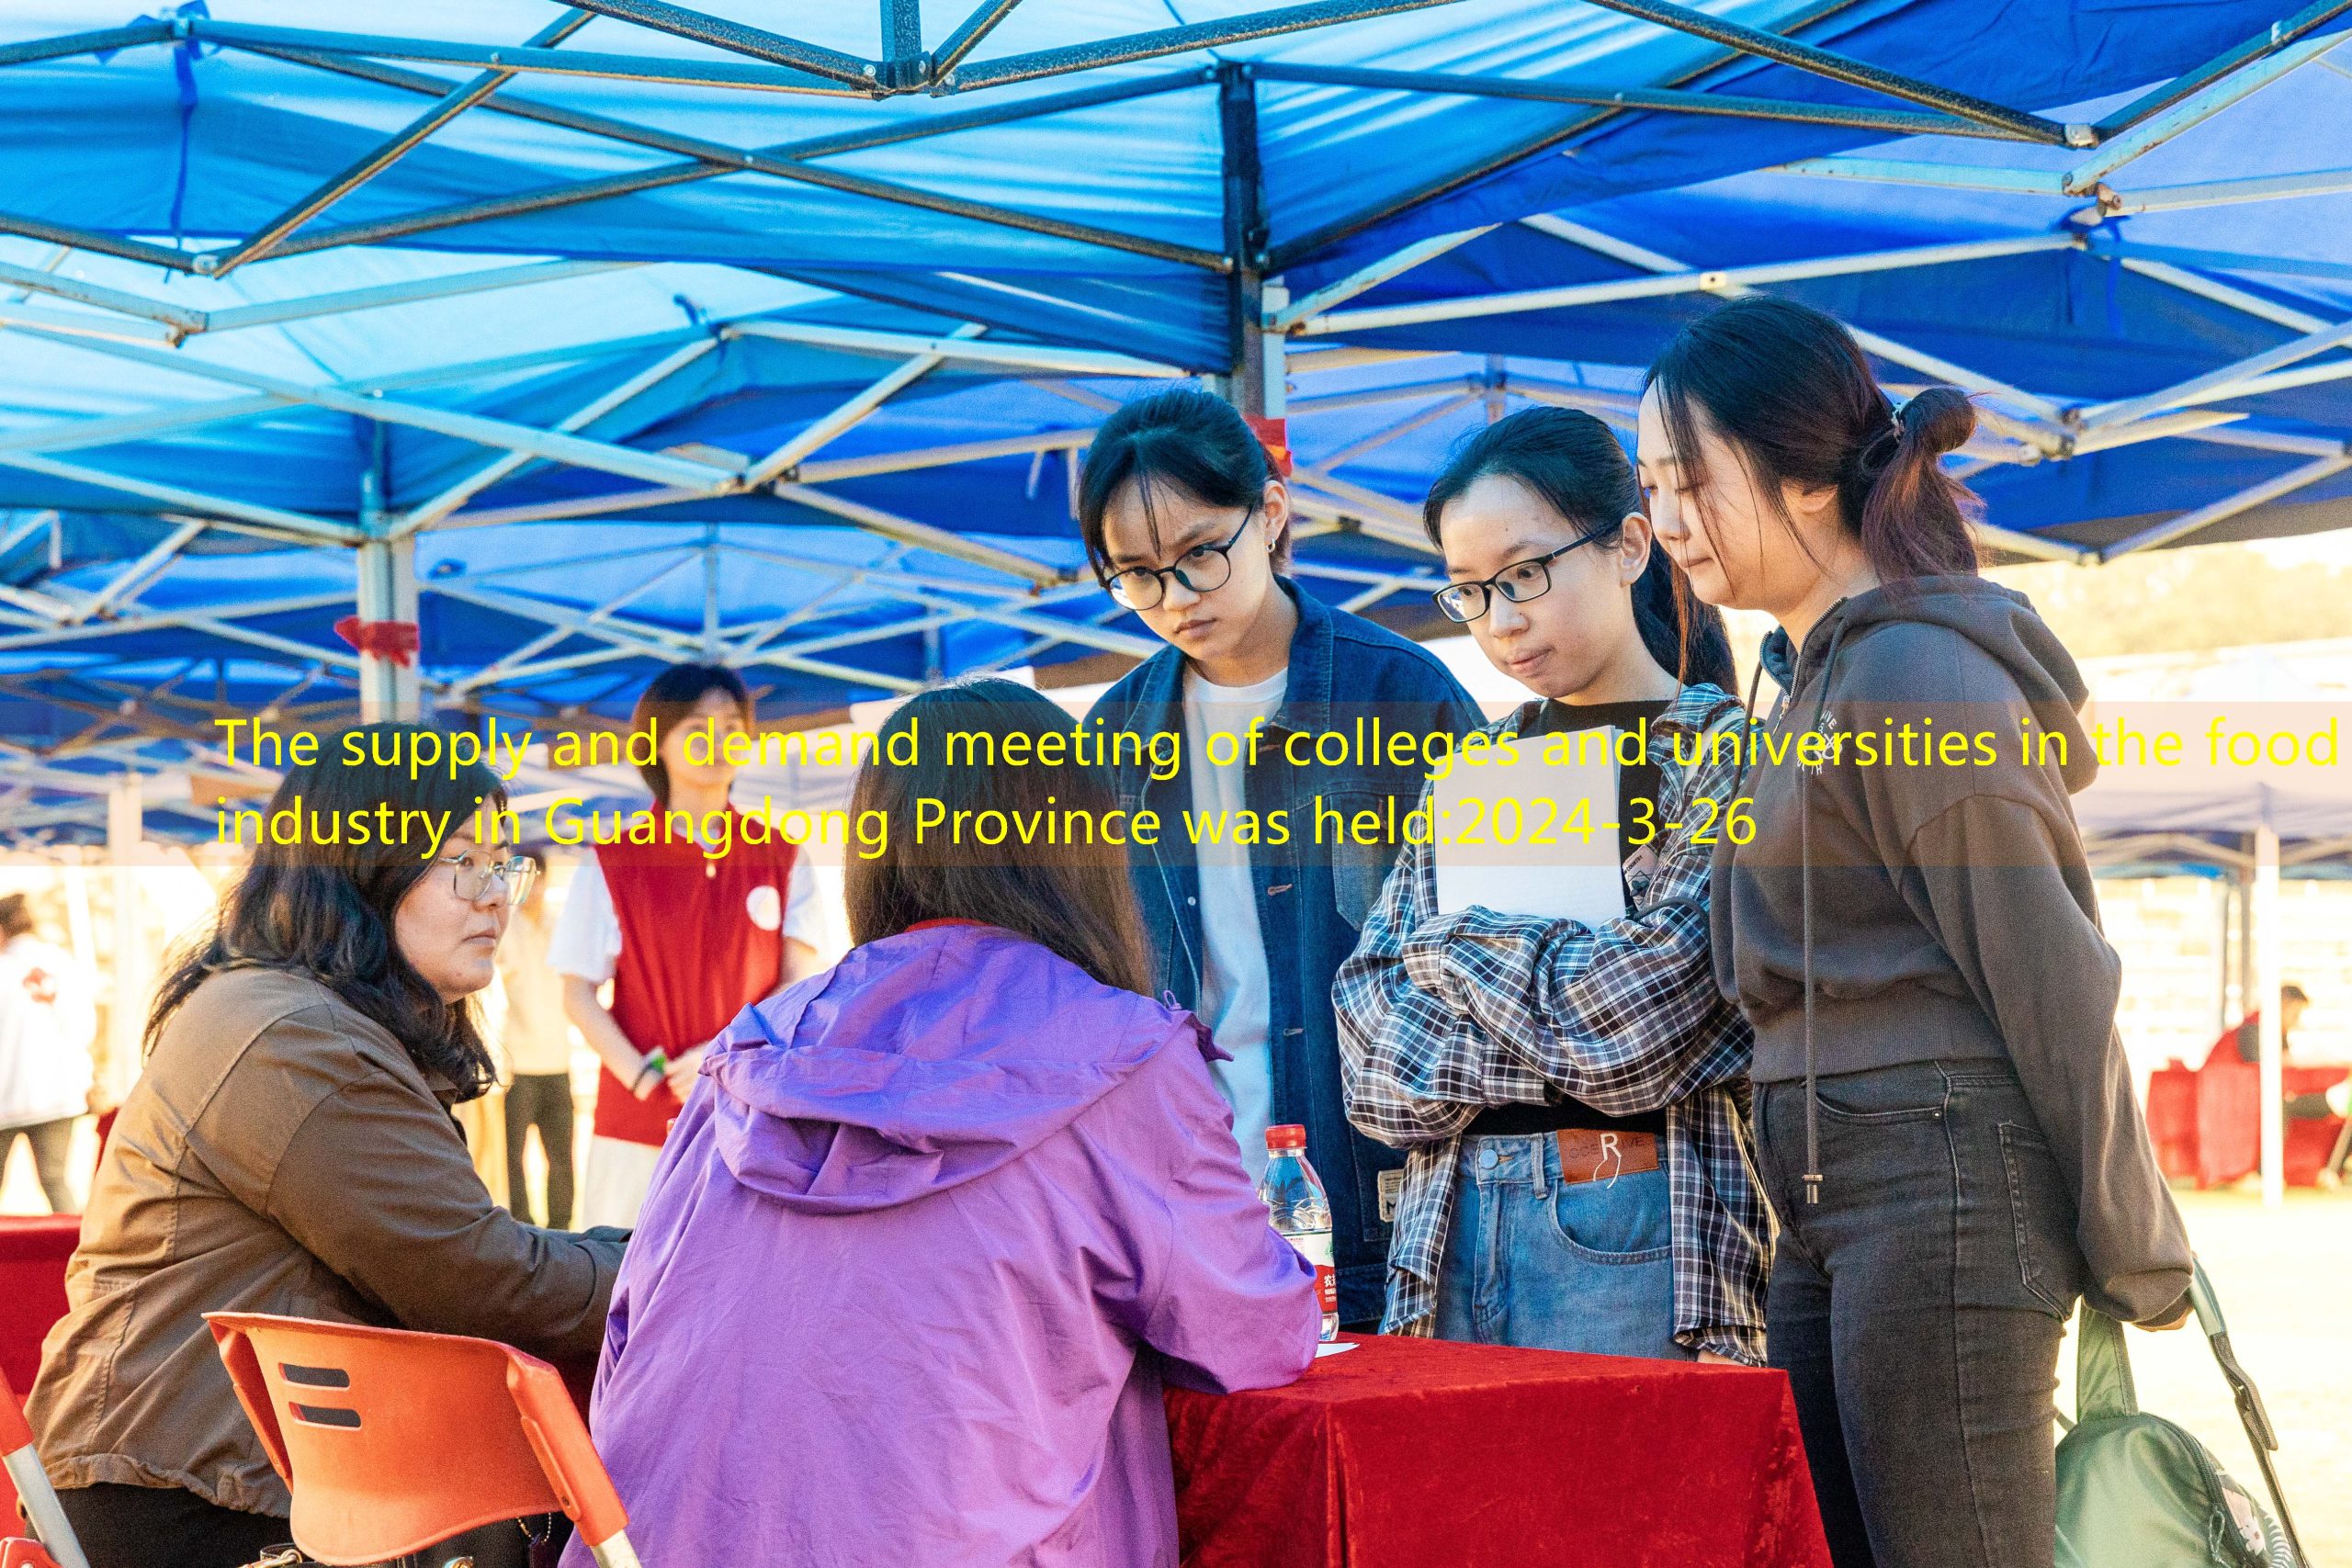 The supply and demand meeting of colleges and universities in the food industry in Guangdong Province was held